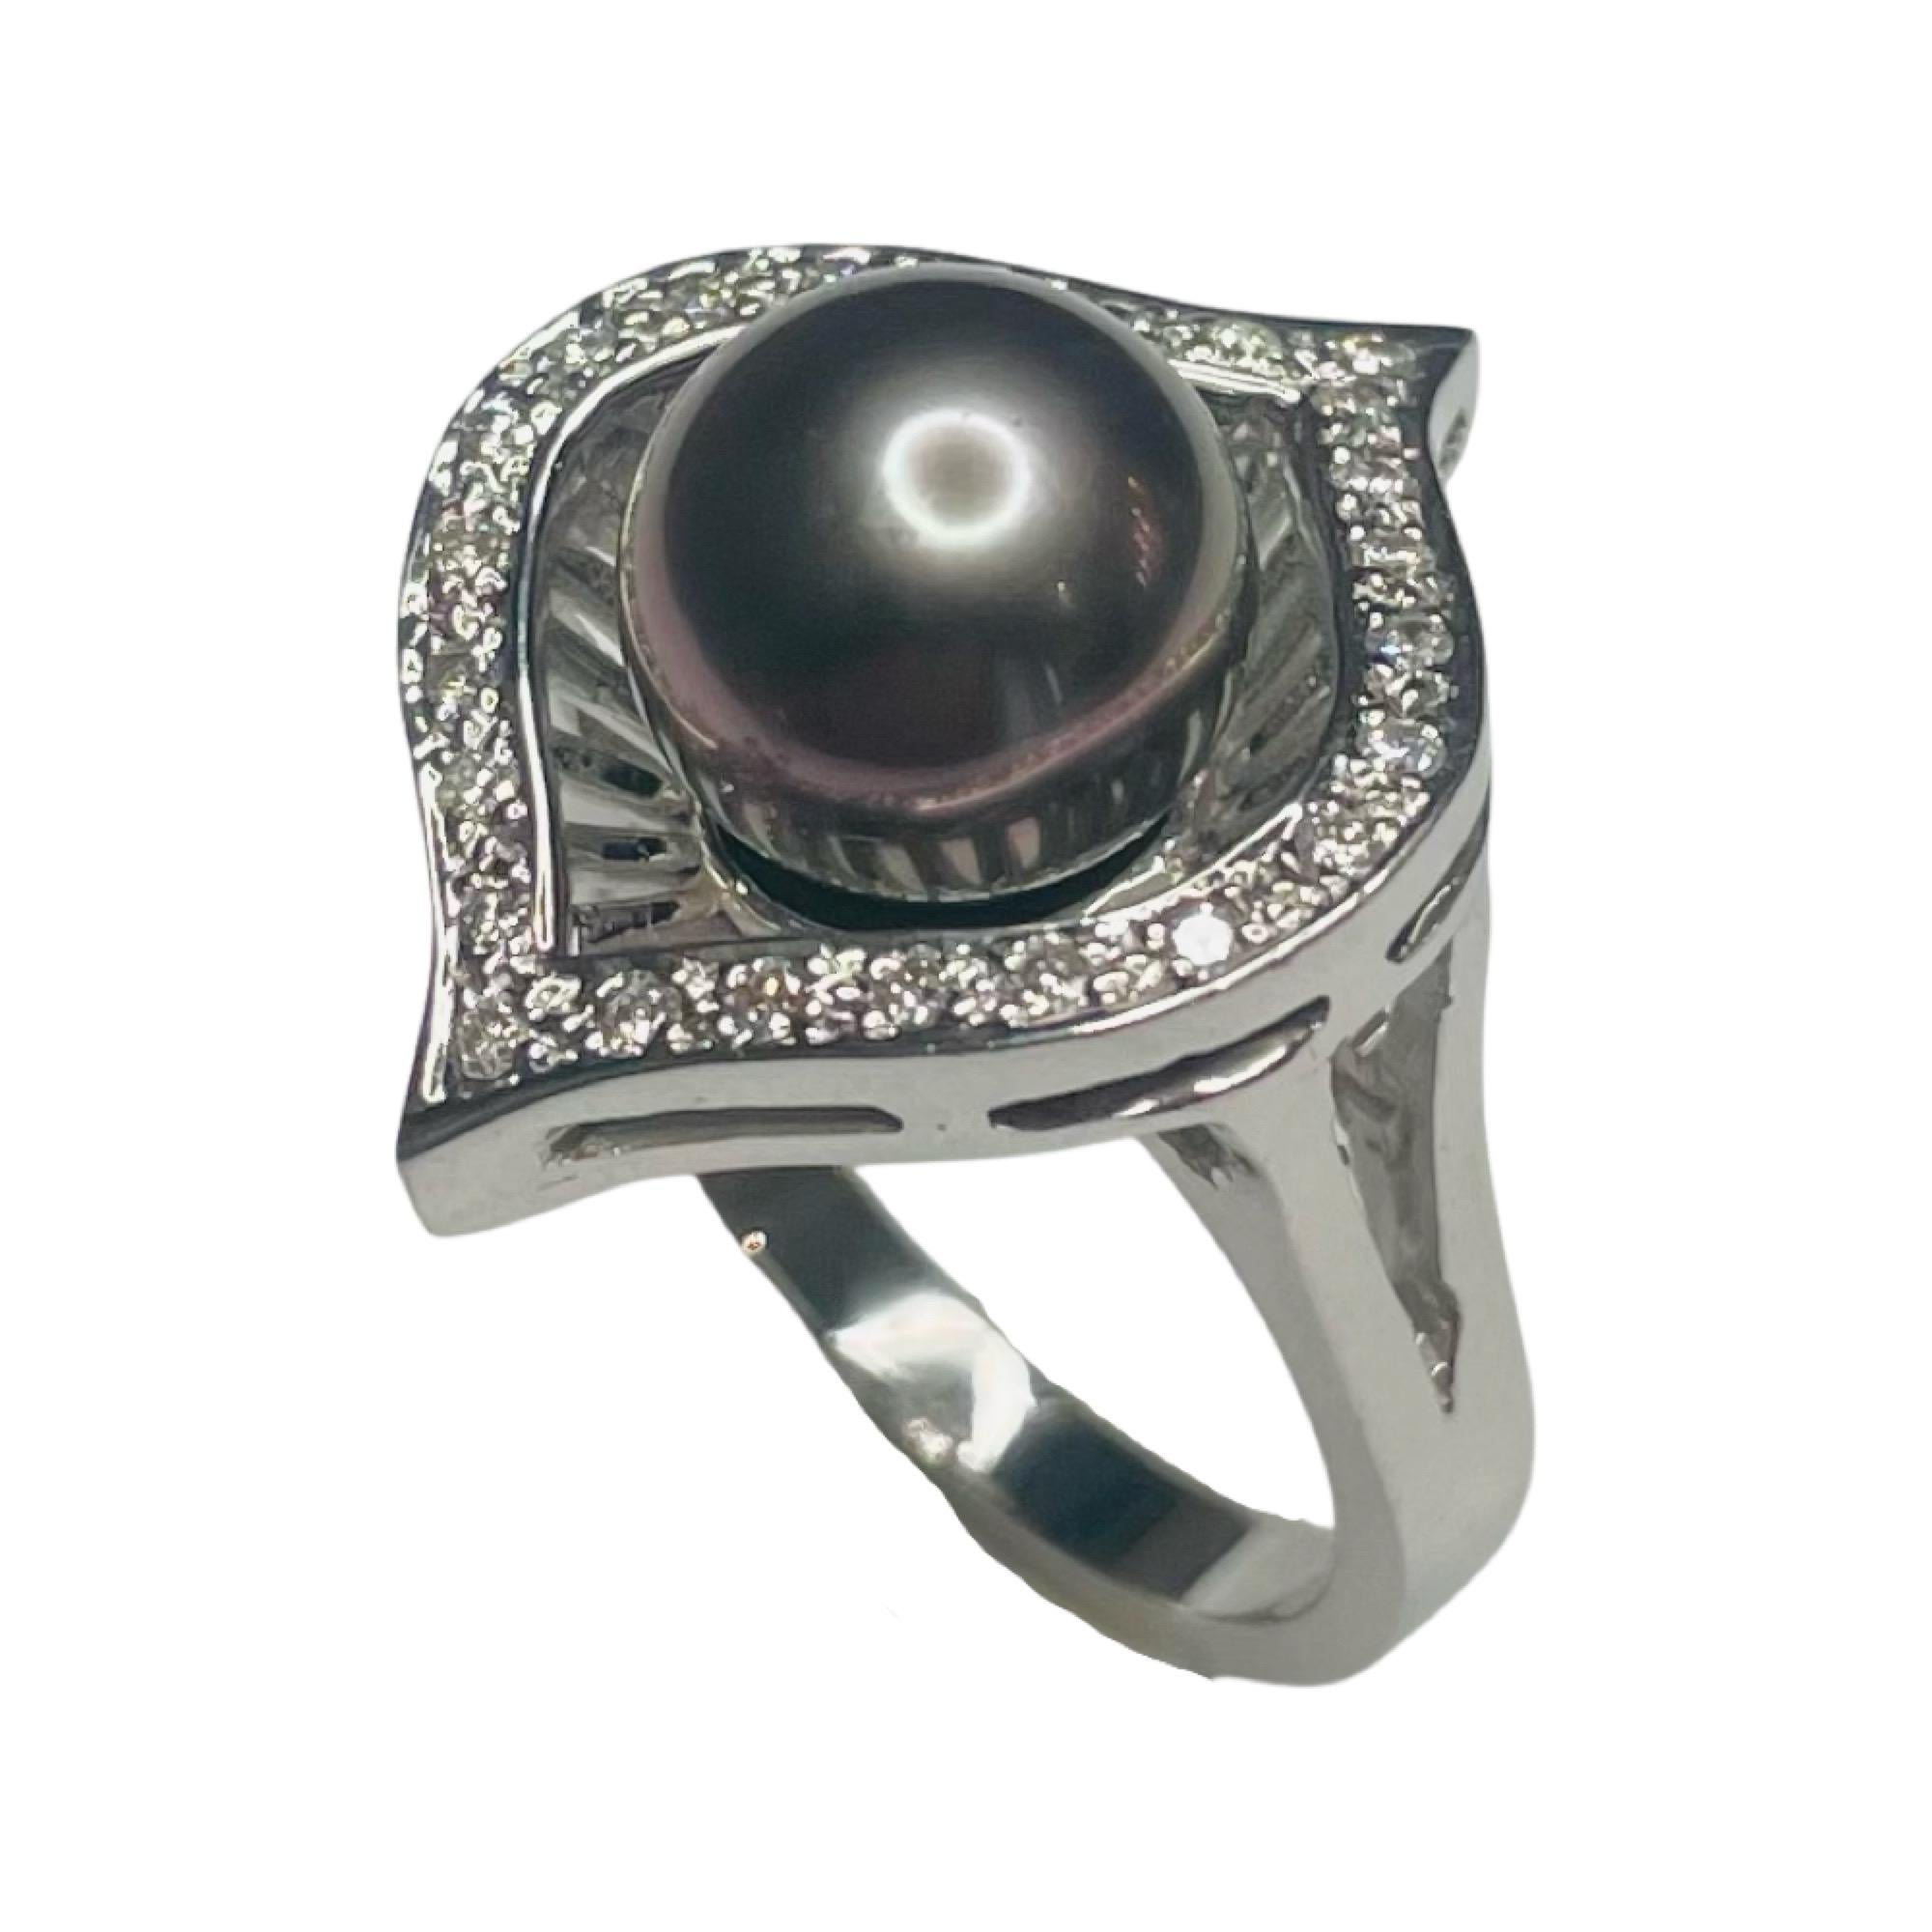 South Sea Pearl 18K White Gold Natural Color Cultured Black Tahitian Pearl Ring. The pearl is 9.65 mm. The pearl is round with slight blemishes and high luster. This ring has 0.25 carats of full cut round brilliant diamonds.  They are of VS clarity